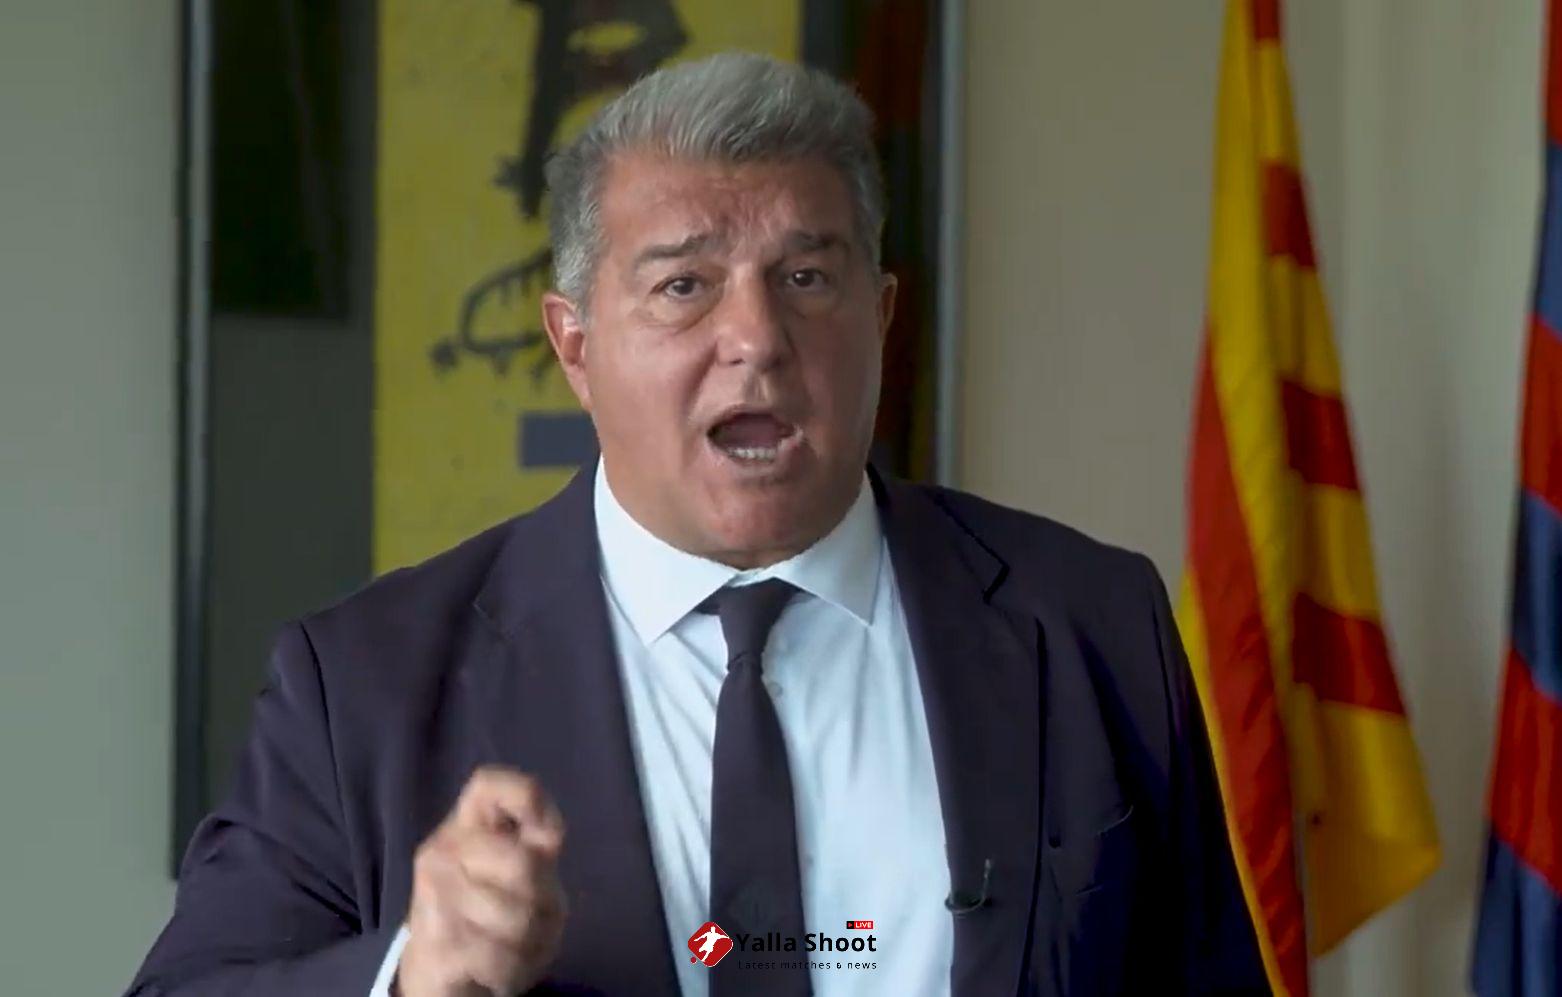 'A disgrace' - Barcelona President Joan Laporta doesn't hold back on Real Madrid refereeing controversy